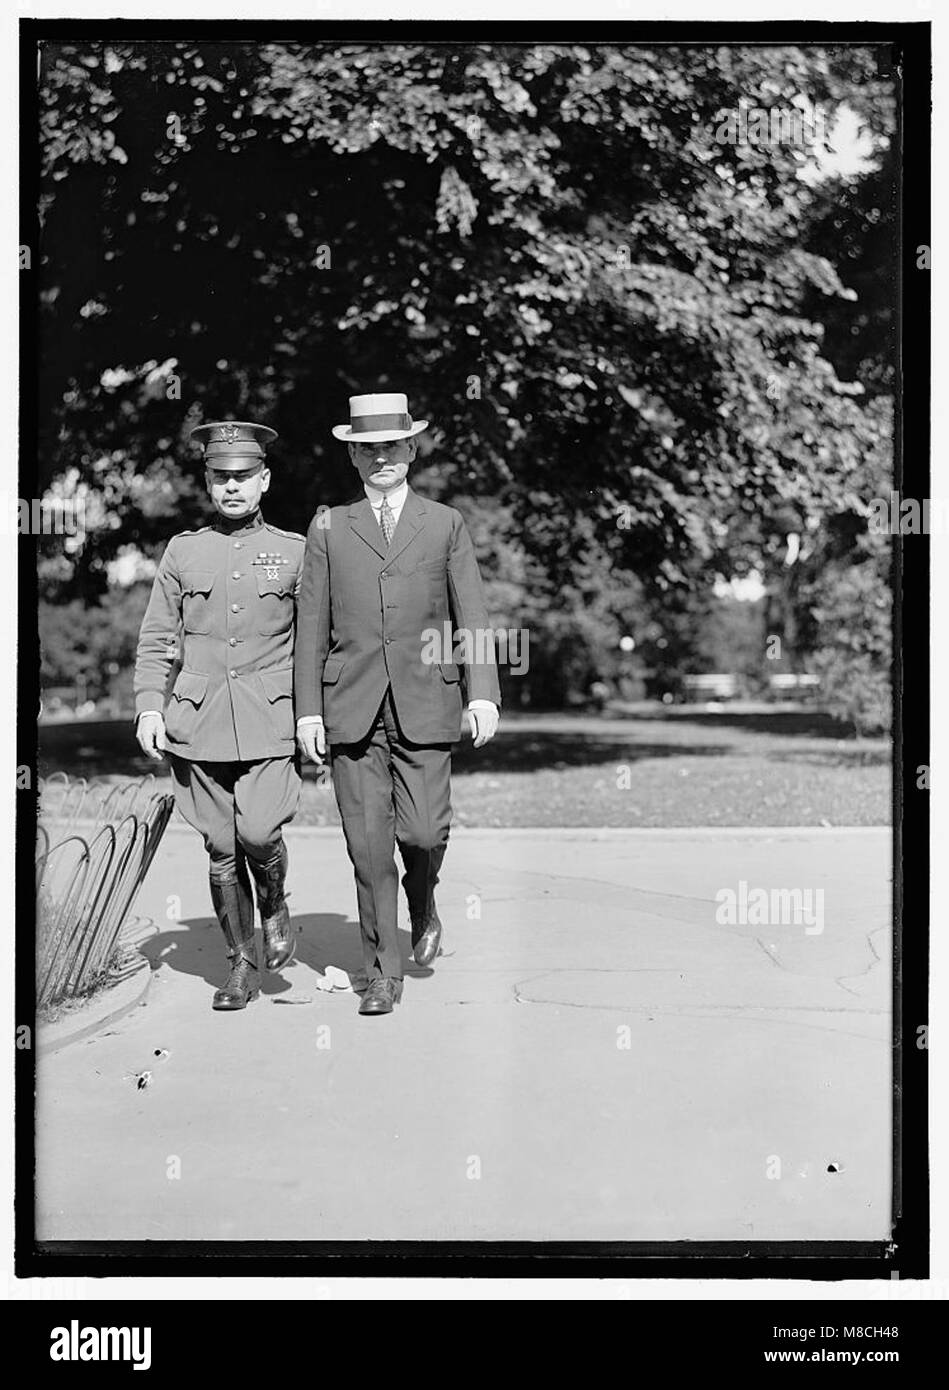 HARRIS, PETER CHARLES. MAJOR GENERAL, U.S.A. LEFT, WITH BROTHER, SEN. WILLIAM J. HARRIS, DIRECTOR OF CENSUS, 1913-1915; FEDERAL TRADE COMMR., 1915-1918; SENATOR FROM GEORGIA, 1919-1925 LCCN2016870307 Stock Photo